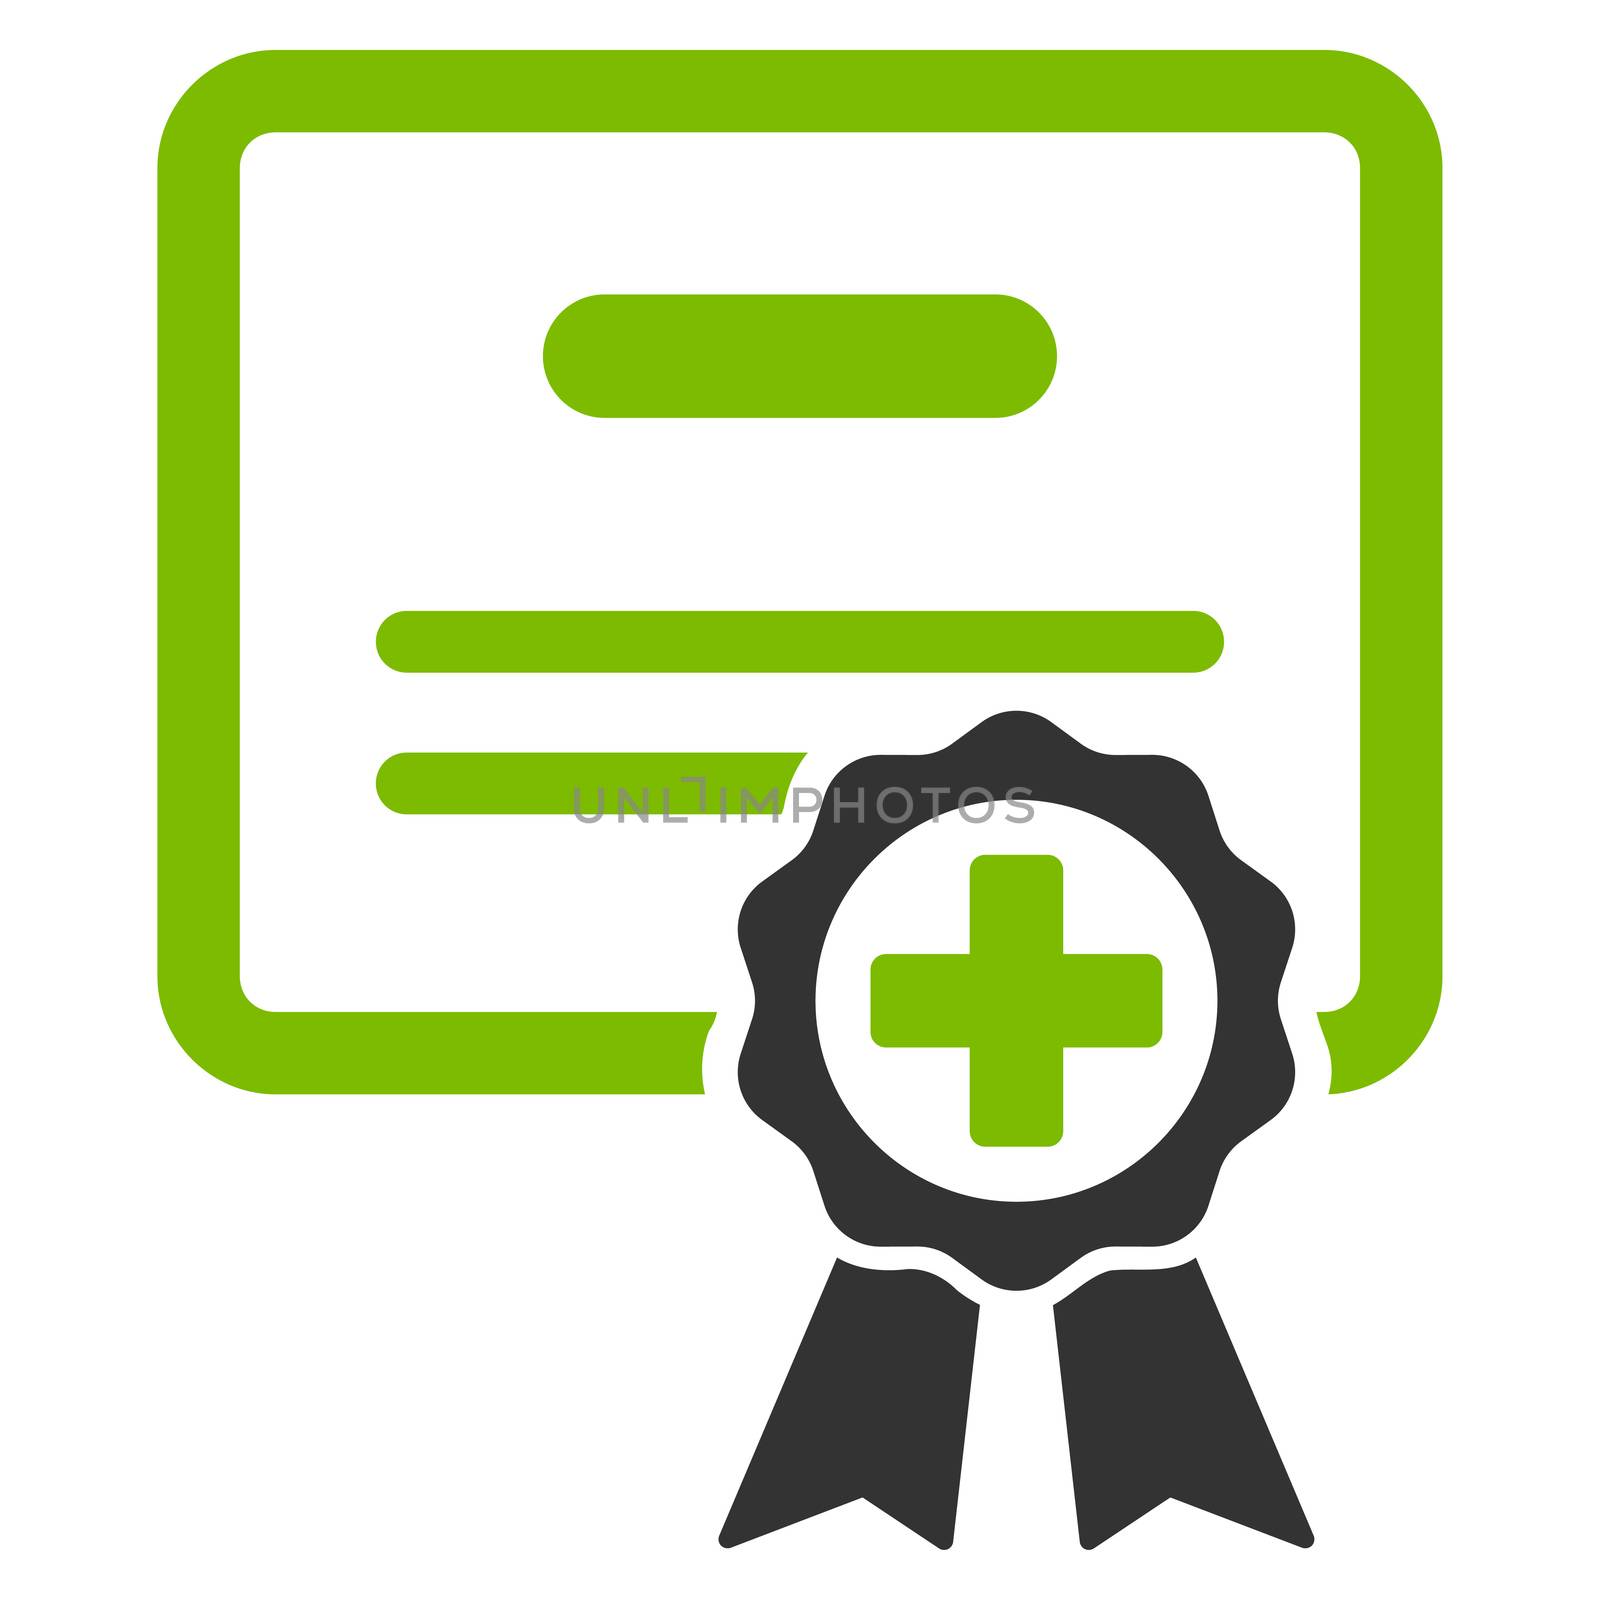 Medical Certificate raster icon. Style is bicolor flat symbol, eco green and gray colors, rounded angles, white background.